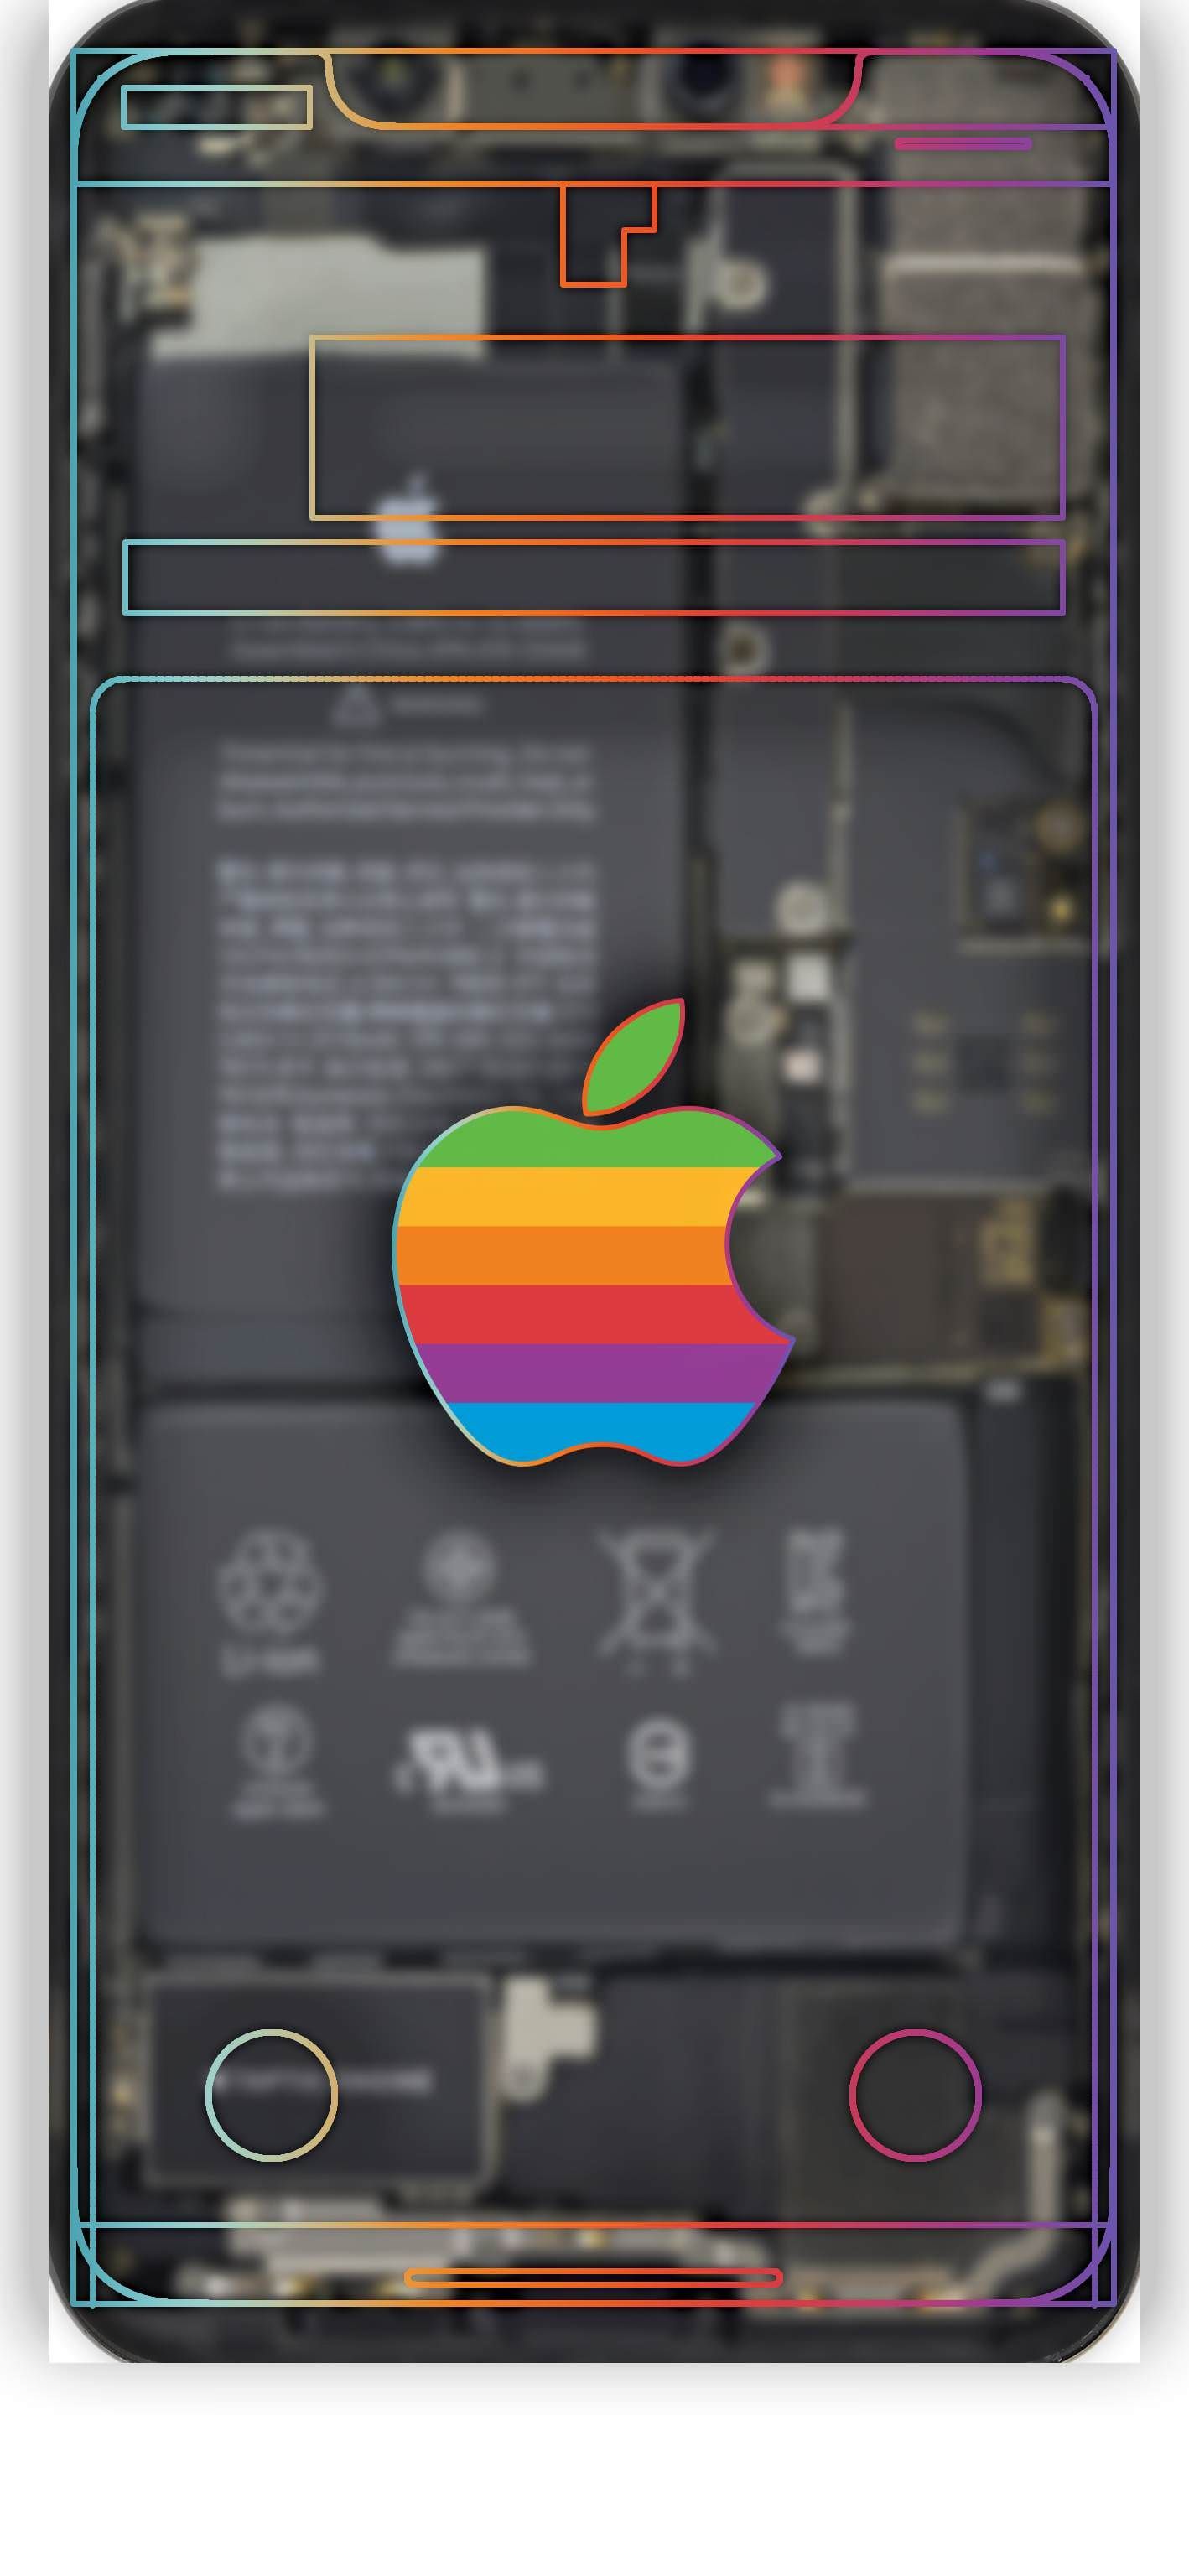 Made these for iPhone XS Max. Space iphone wallpaper, Apple logo